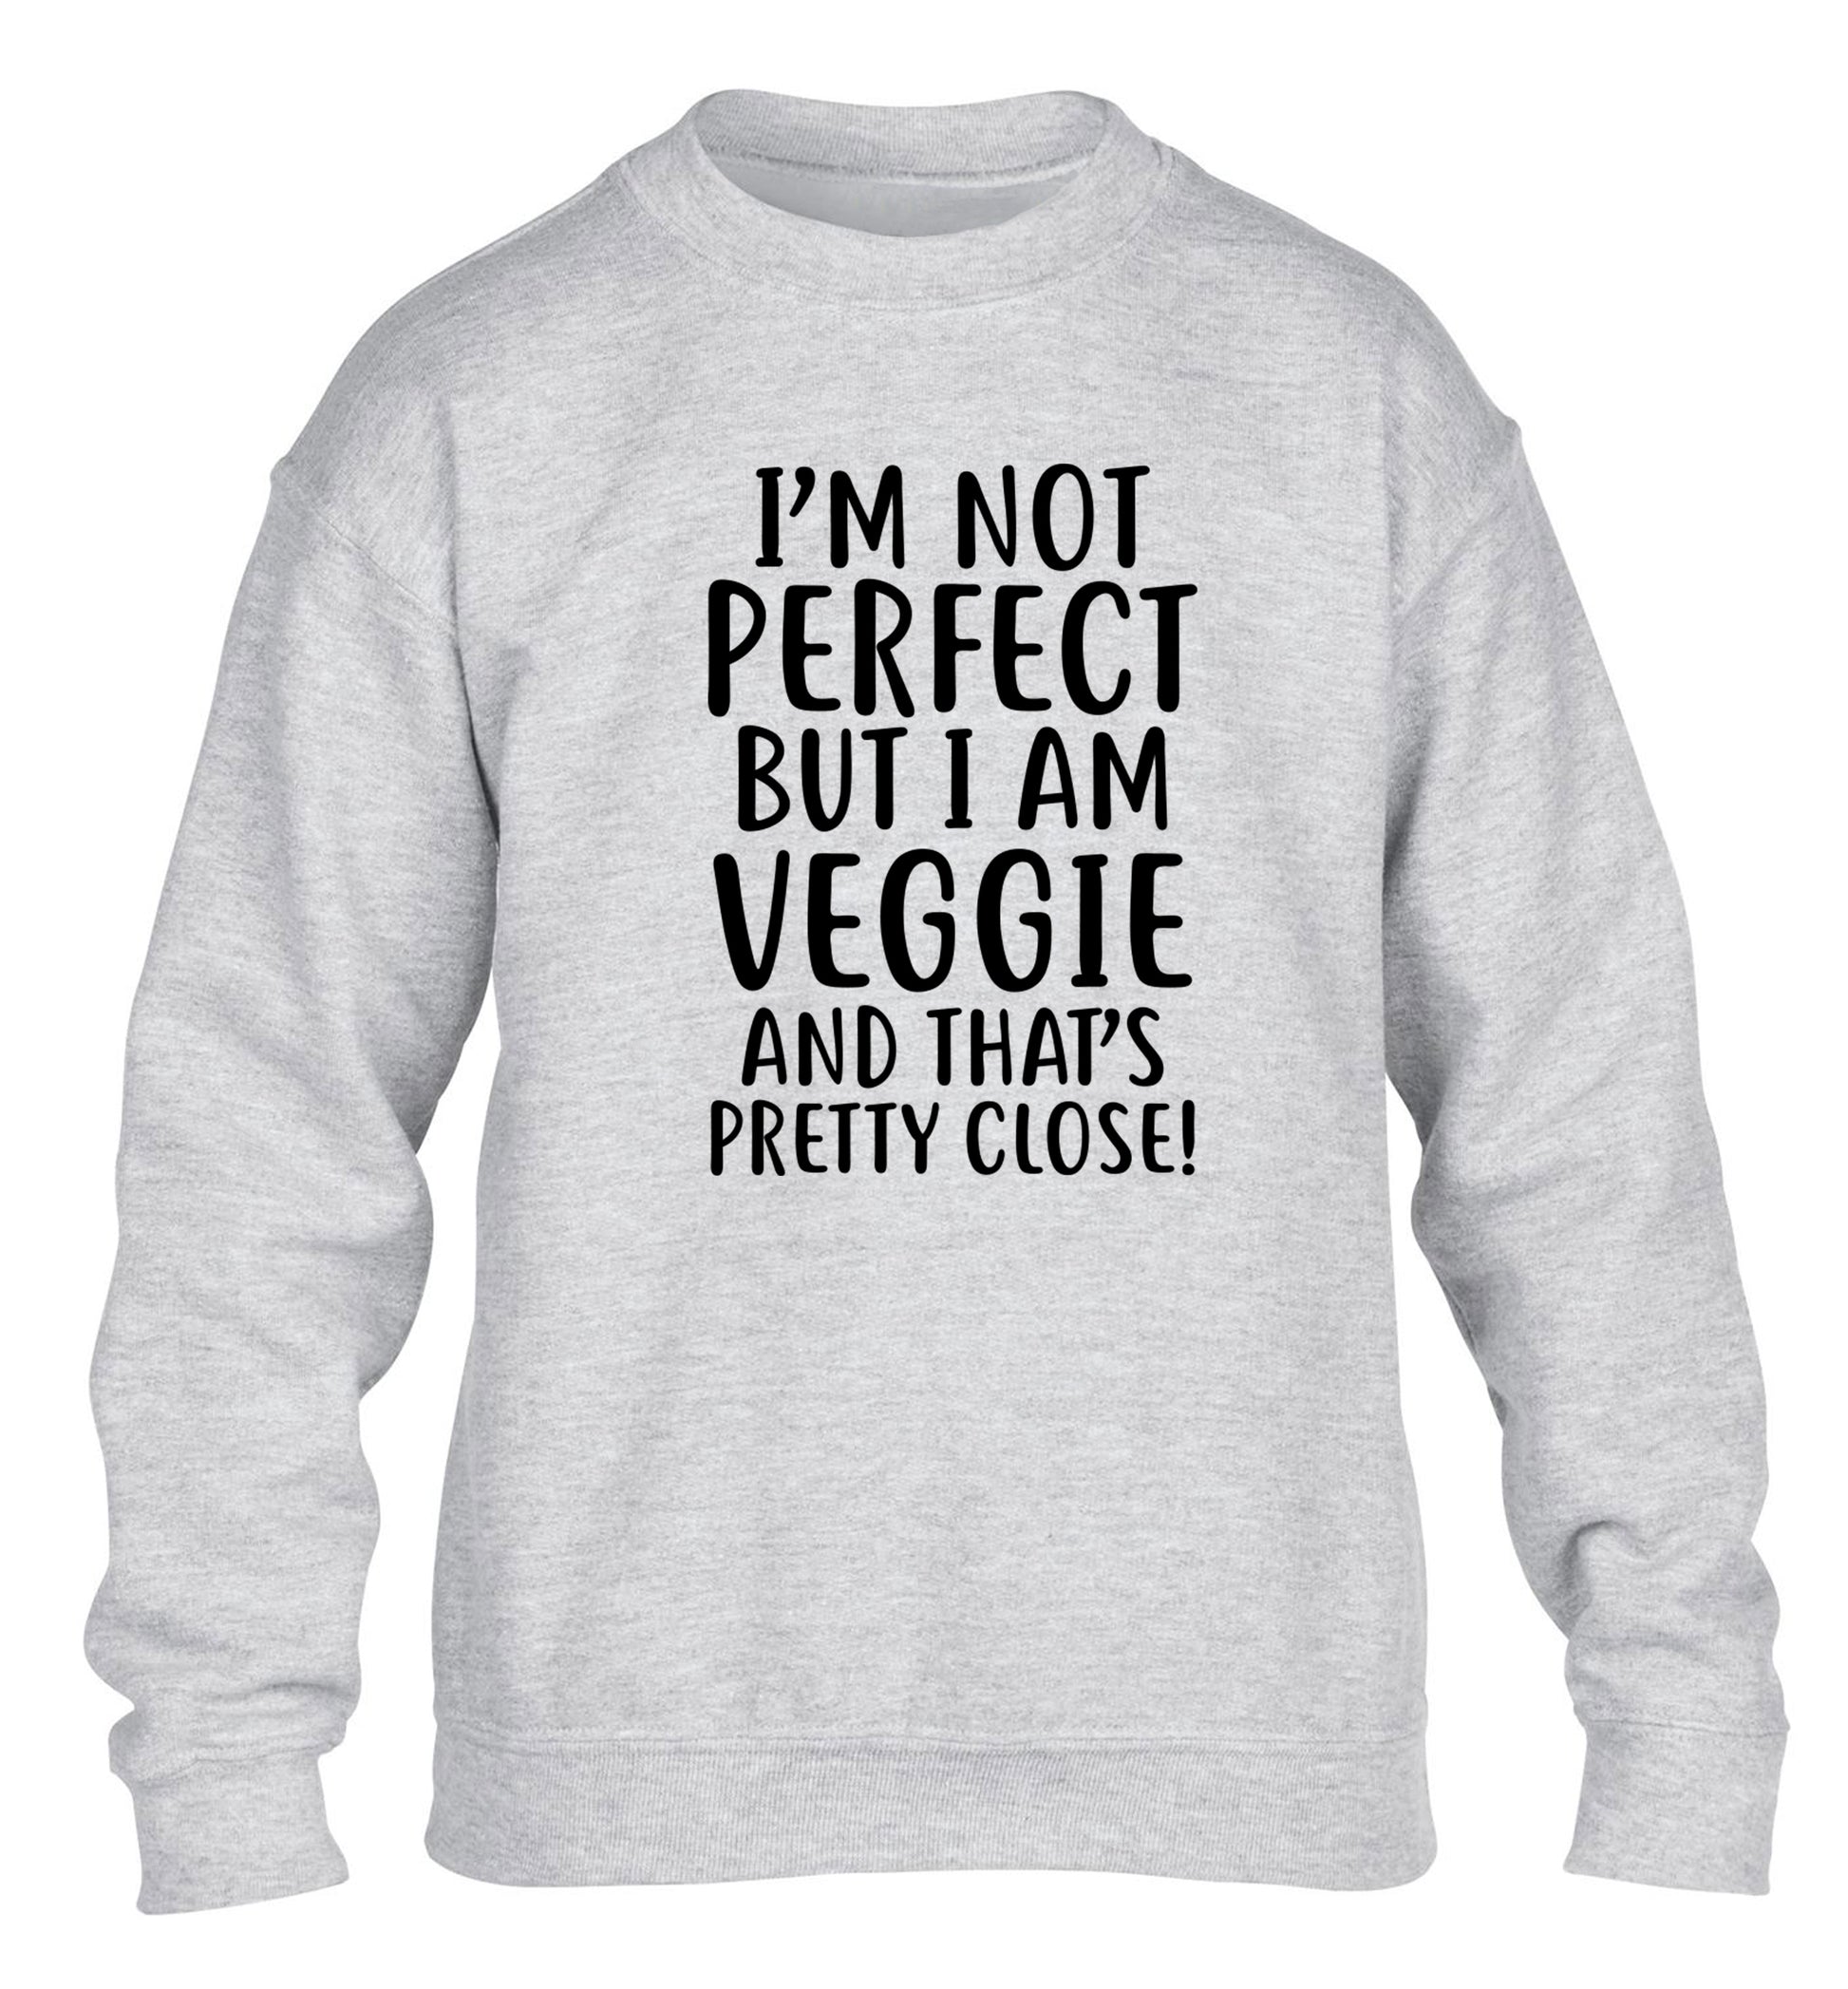 Might not be perfect but I am veggie children's grey sweater 12-13 Years